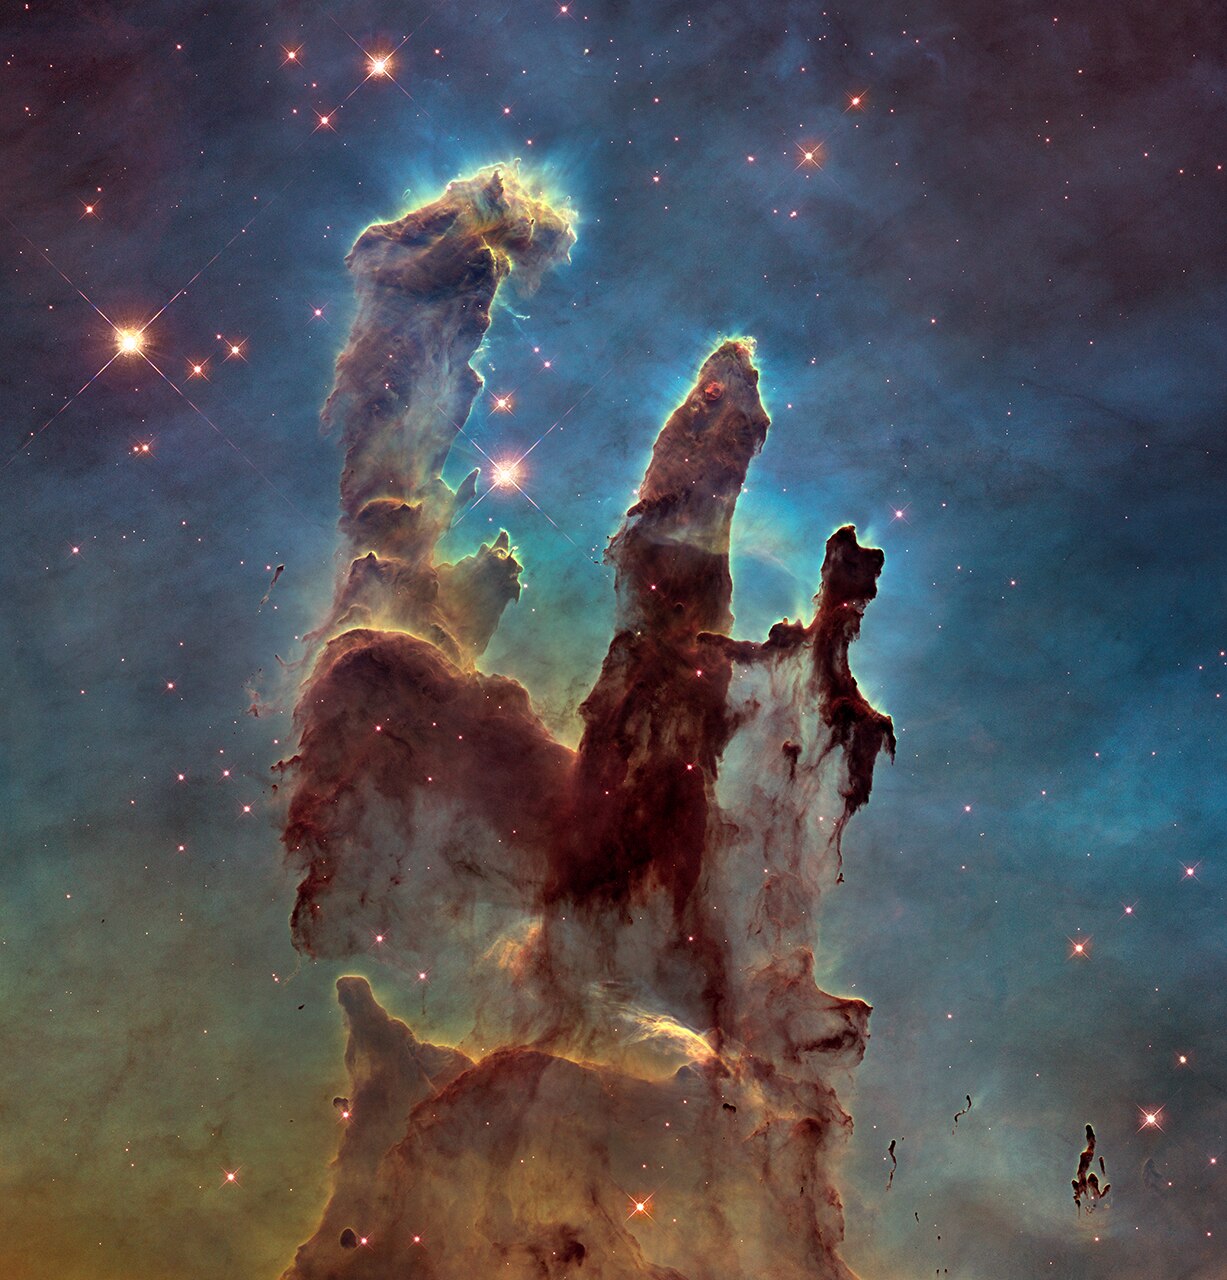 A detailed image of the Pillars of Creation, showing reddish purple dust clouds on a greenish-black background.